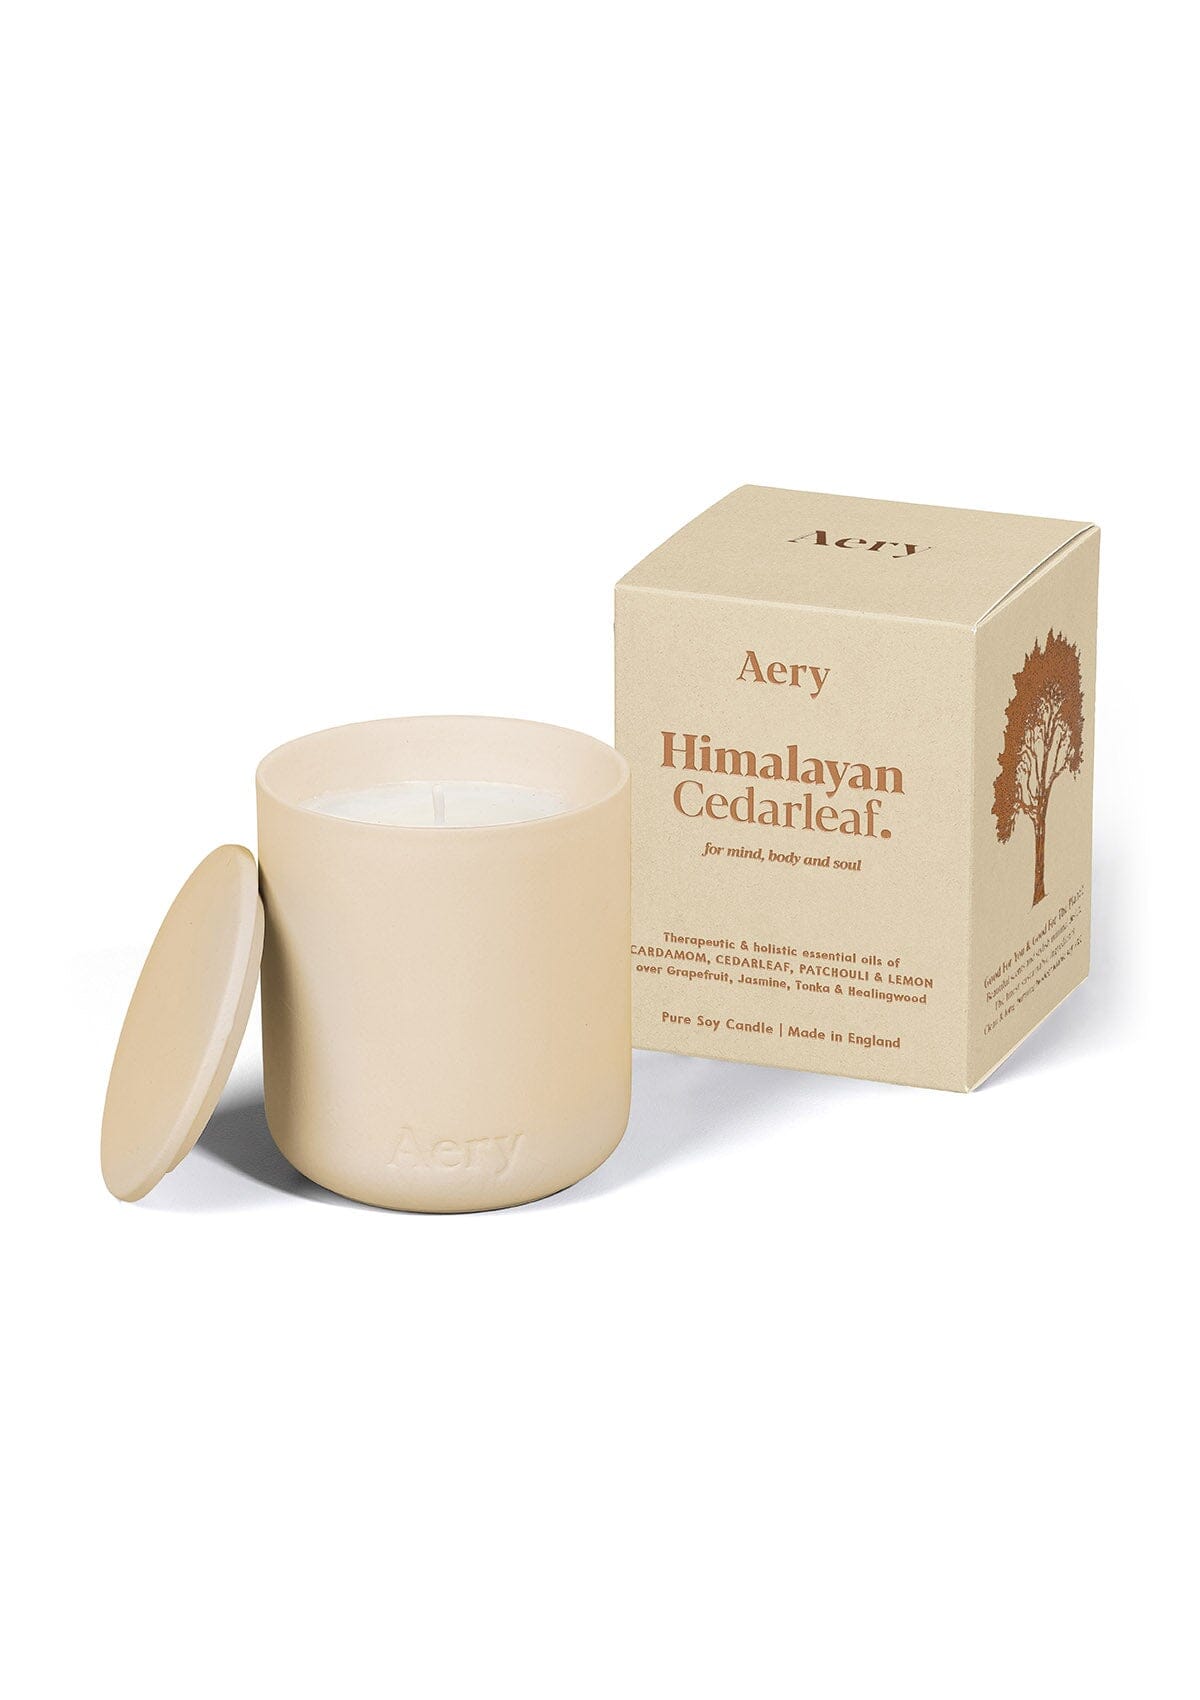 Cream Himalayan Cedarleaf ceramic scented candle displayed next to product packaging by Aery on white background  